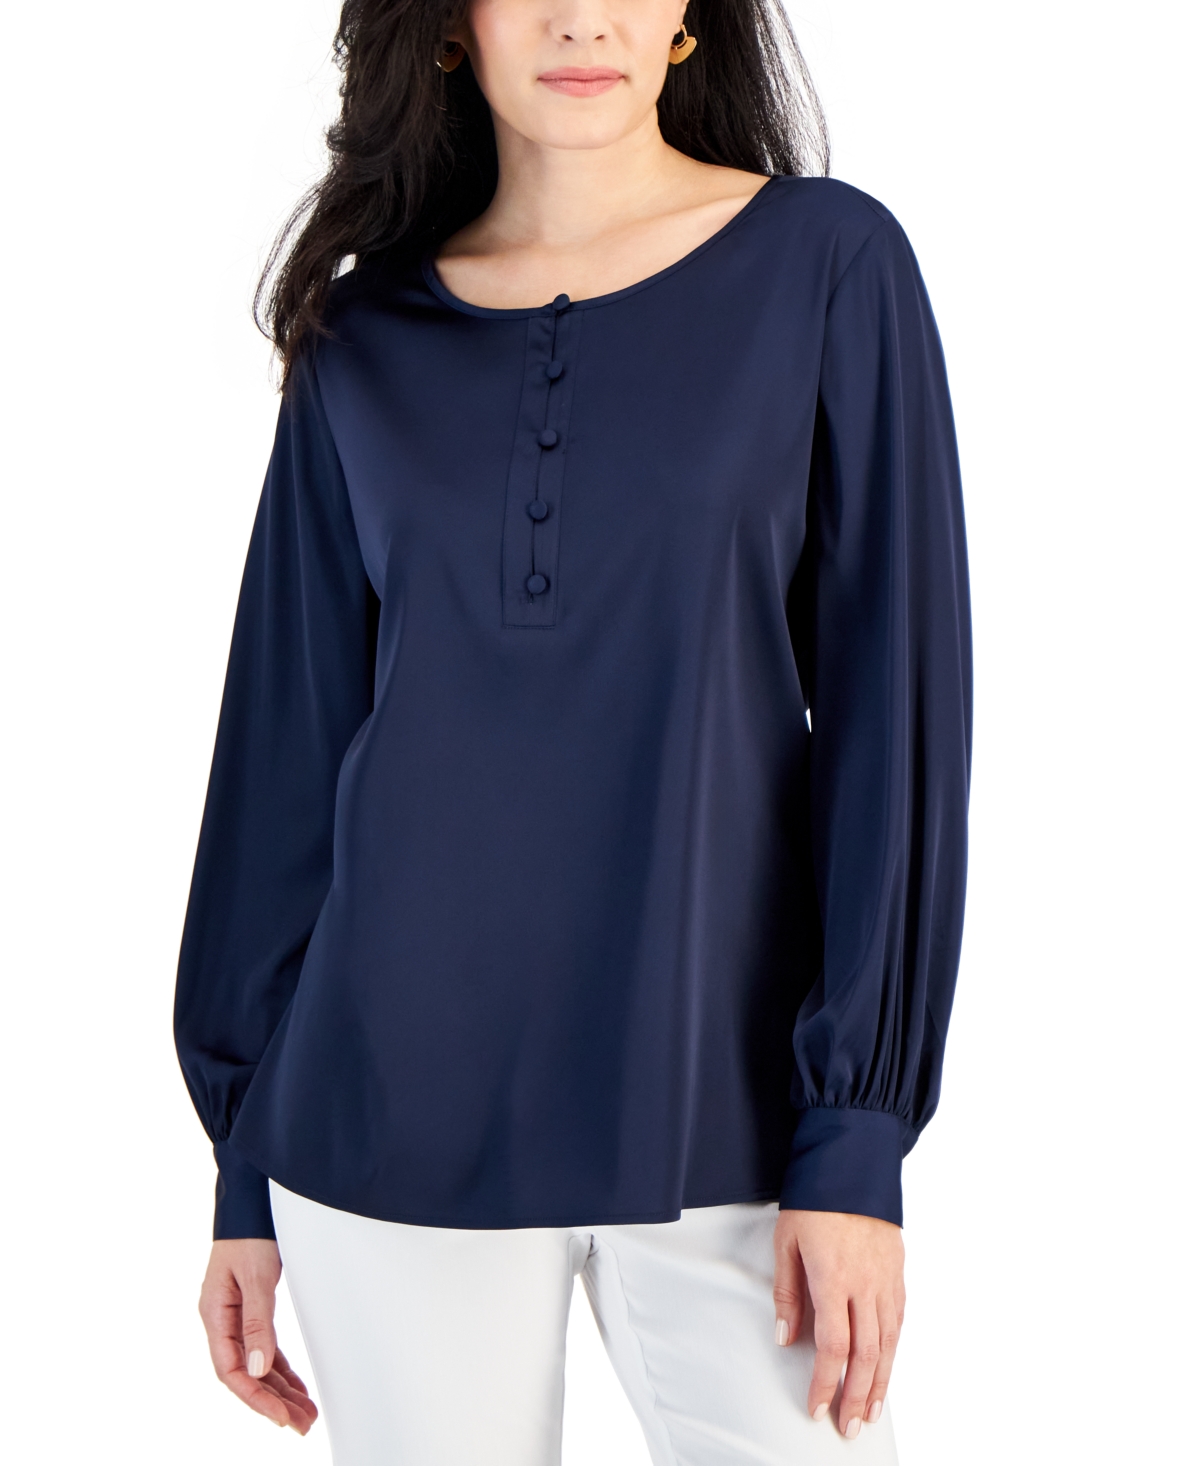 Petite Satin Button-Up Blouse, Created for Macy's - Intrepid Blue